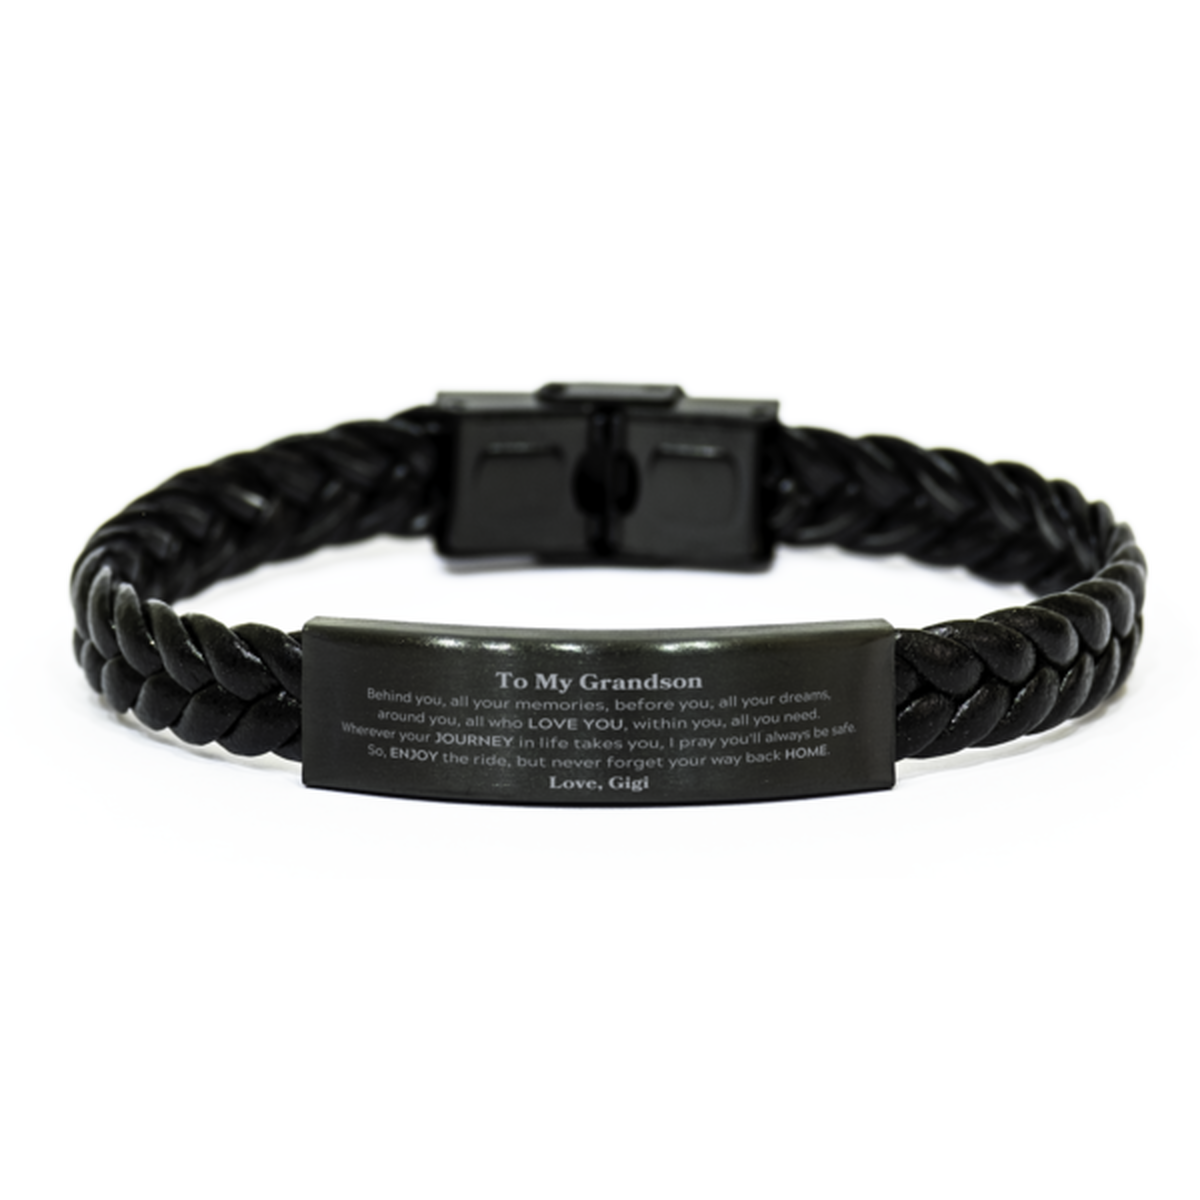 To My Grandson Graduation Gifts from Gigi, Grandson Braided Leather Bracelet Christmas Birthday Gifts for Grandson Behind you, all your memories, before you, all your dreams. Love, Gigi